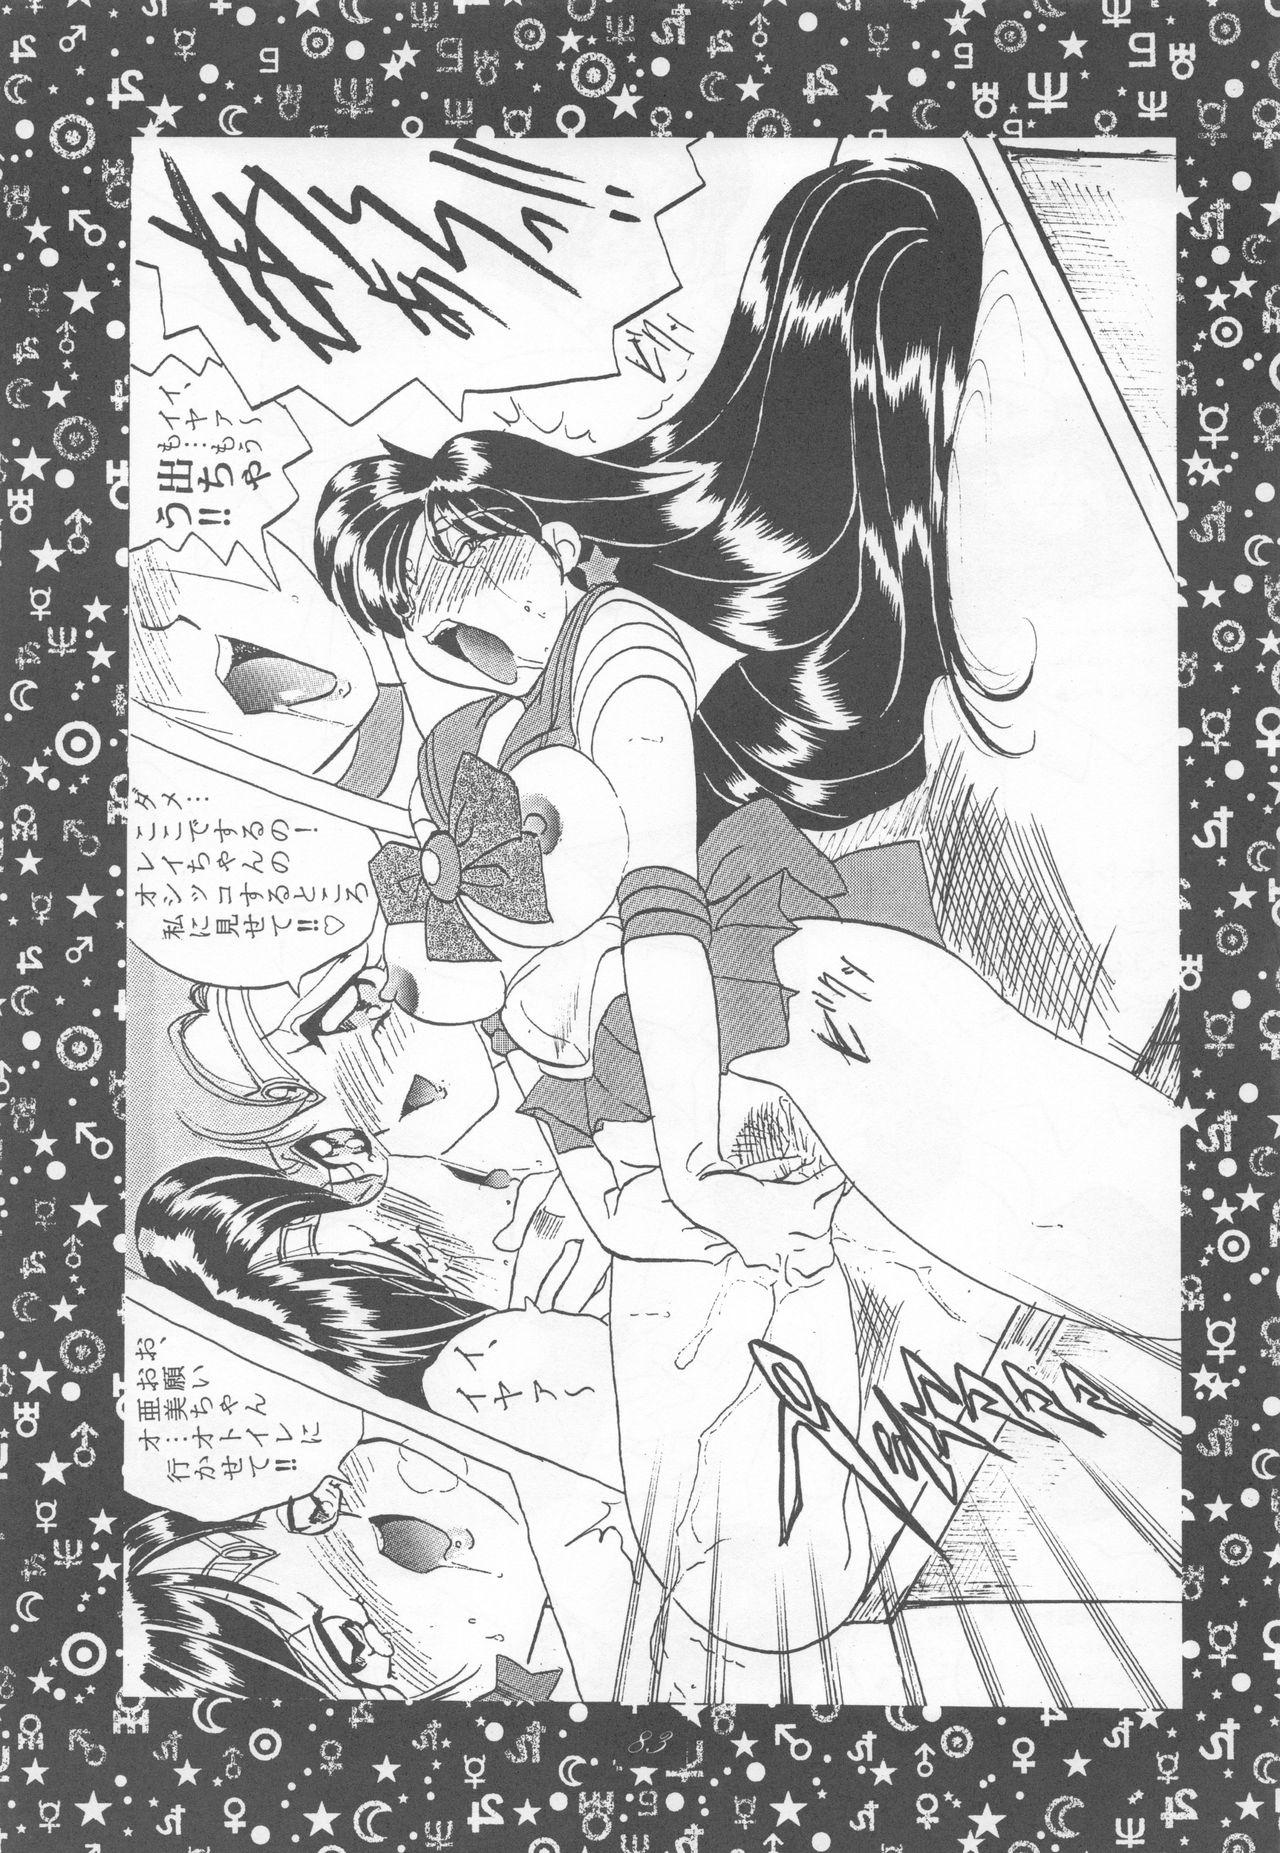 Sailor Moon 1 Page Gekijou P2 - SAILOR MOON ONE PAGE THEATER II 82